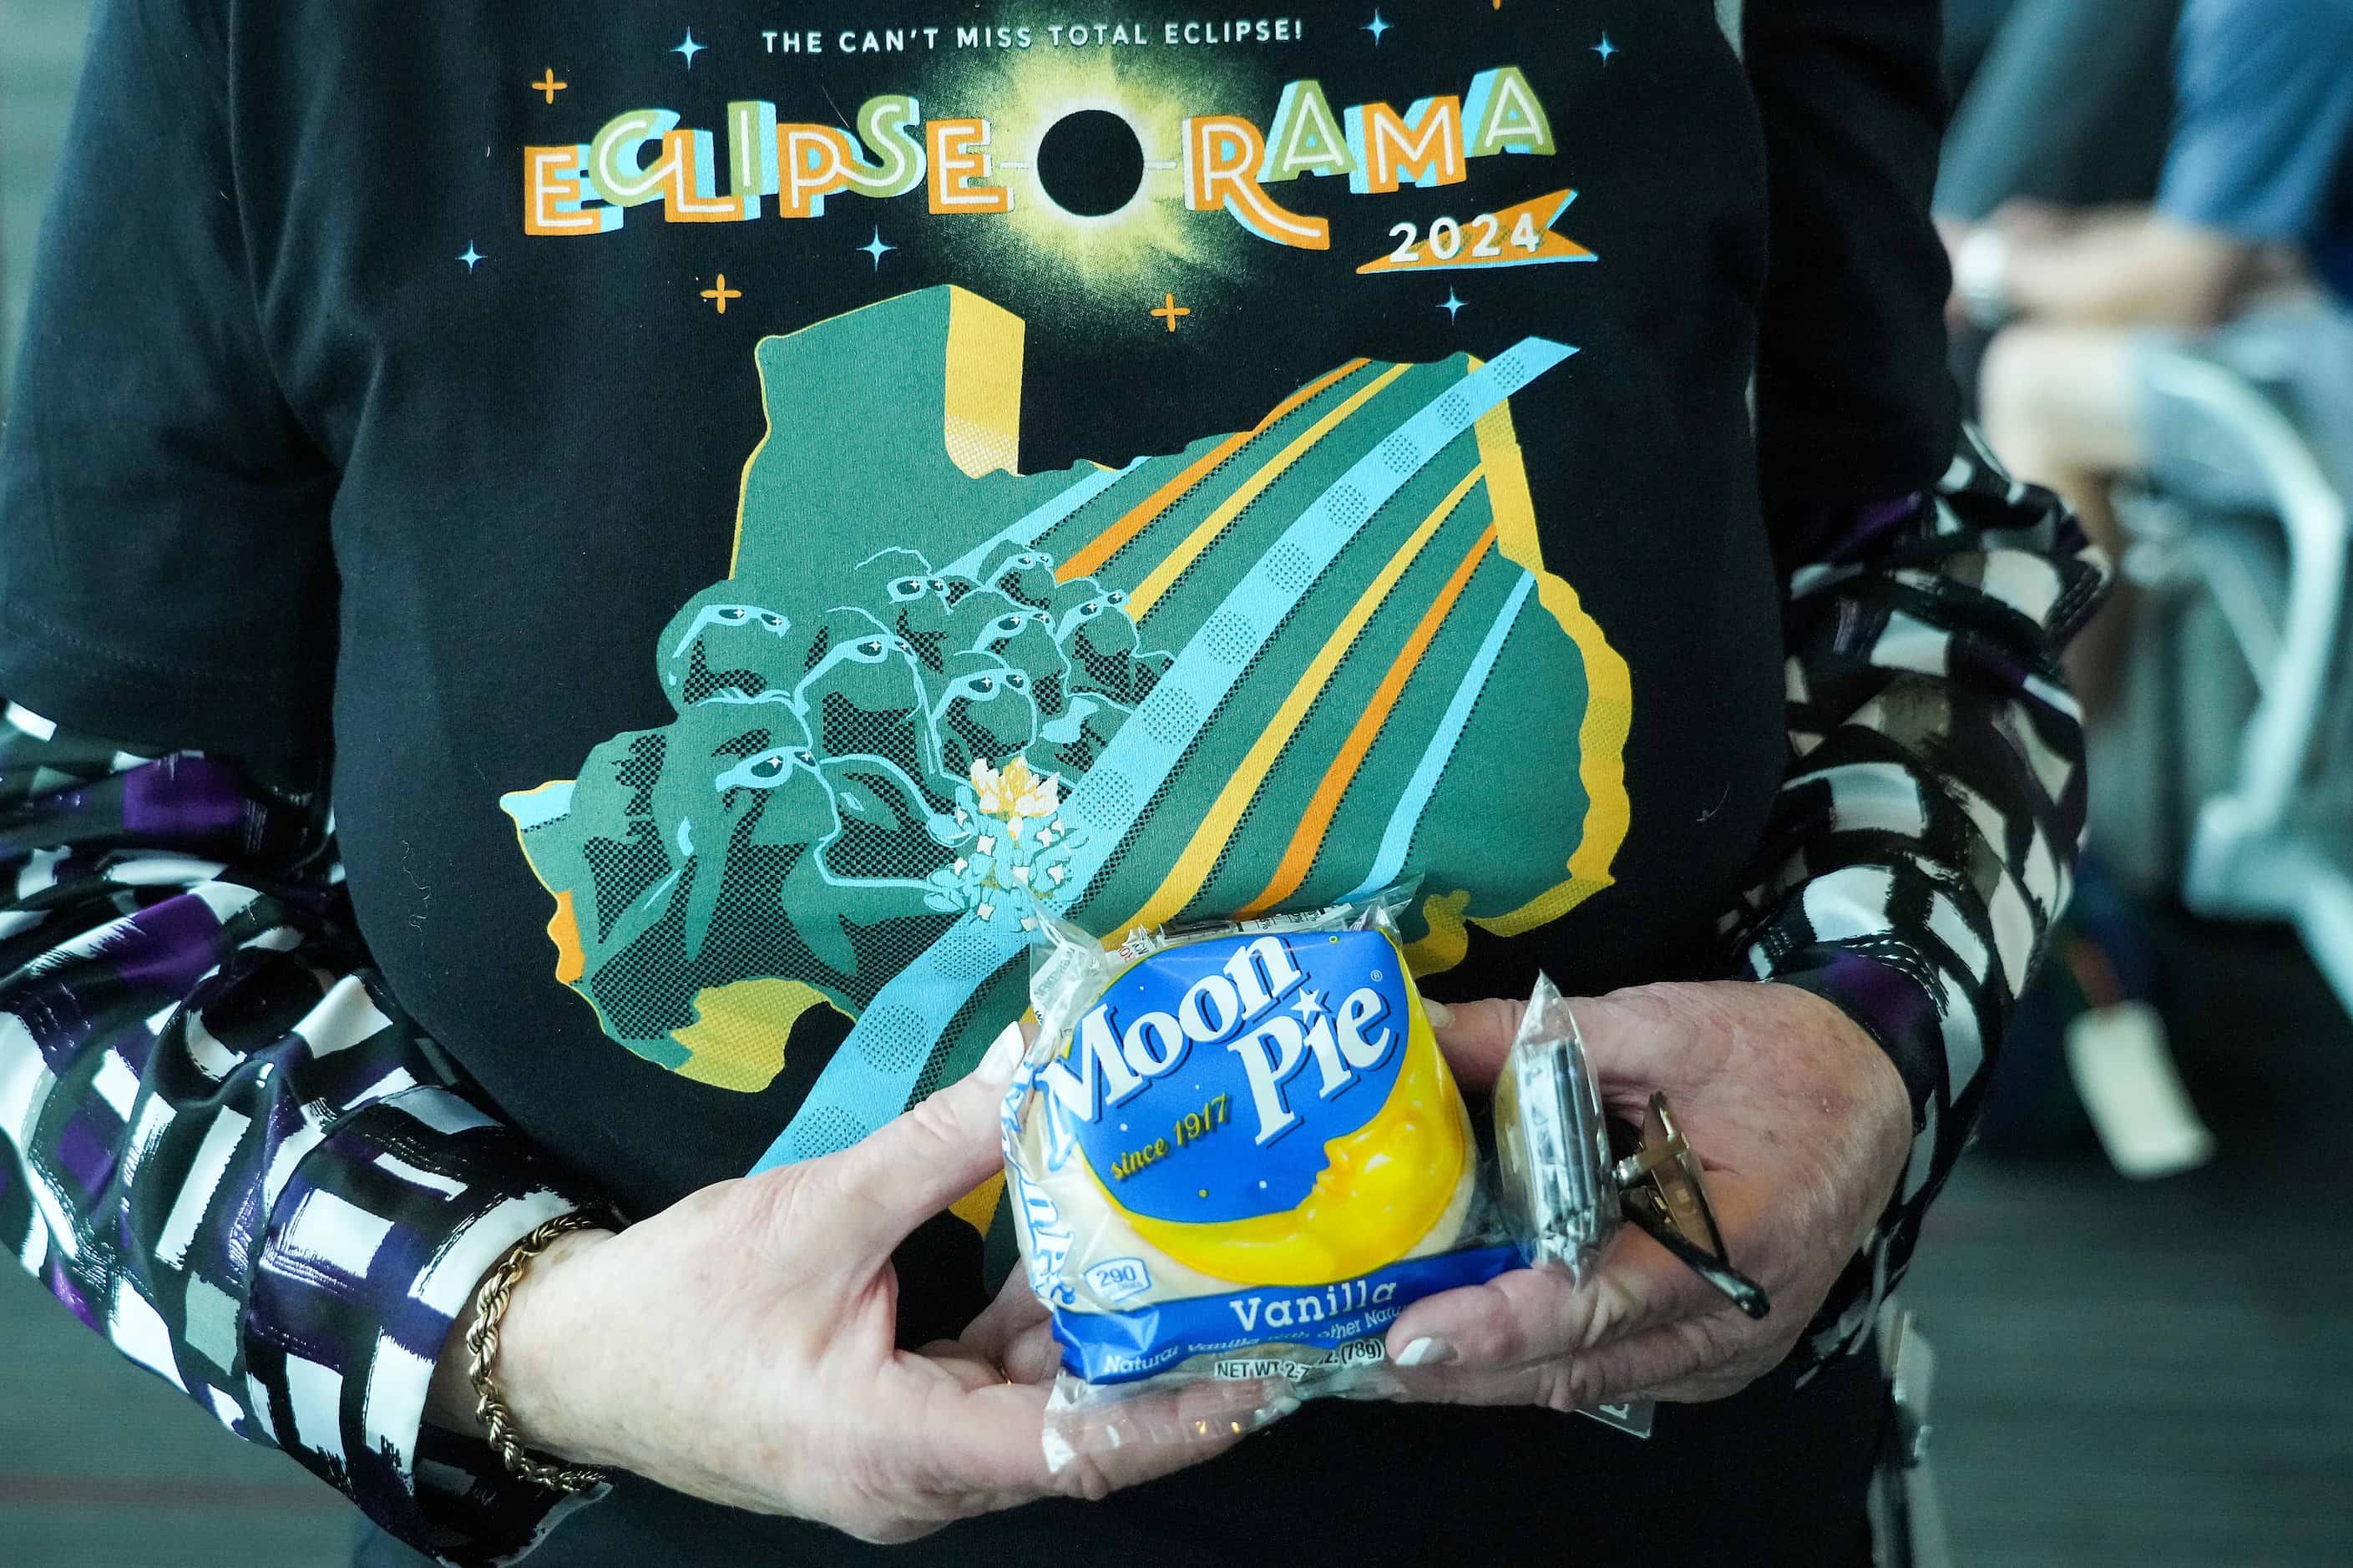 Bonnie Shatun holds a moon pie and wears an t-shirt promoting Eclipse-O-Rama before boarding...